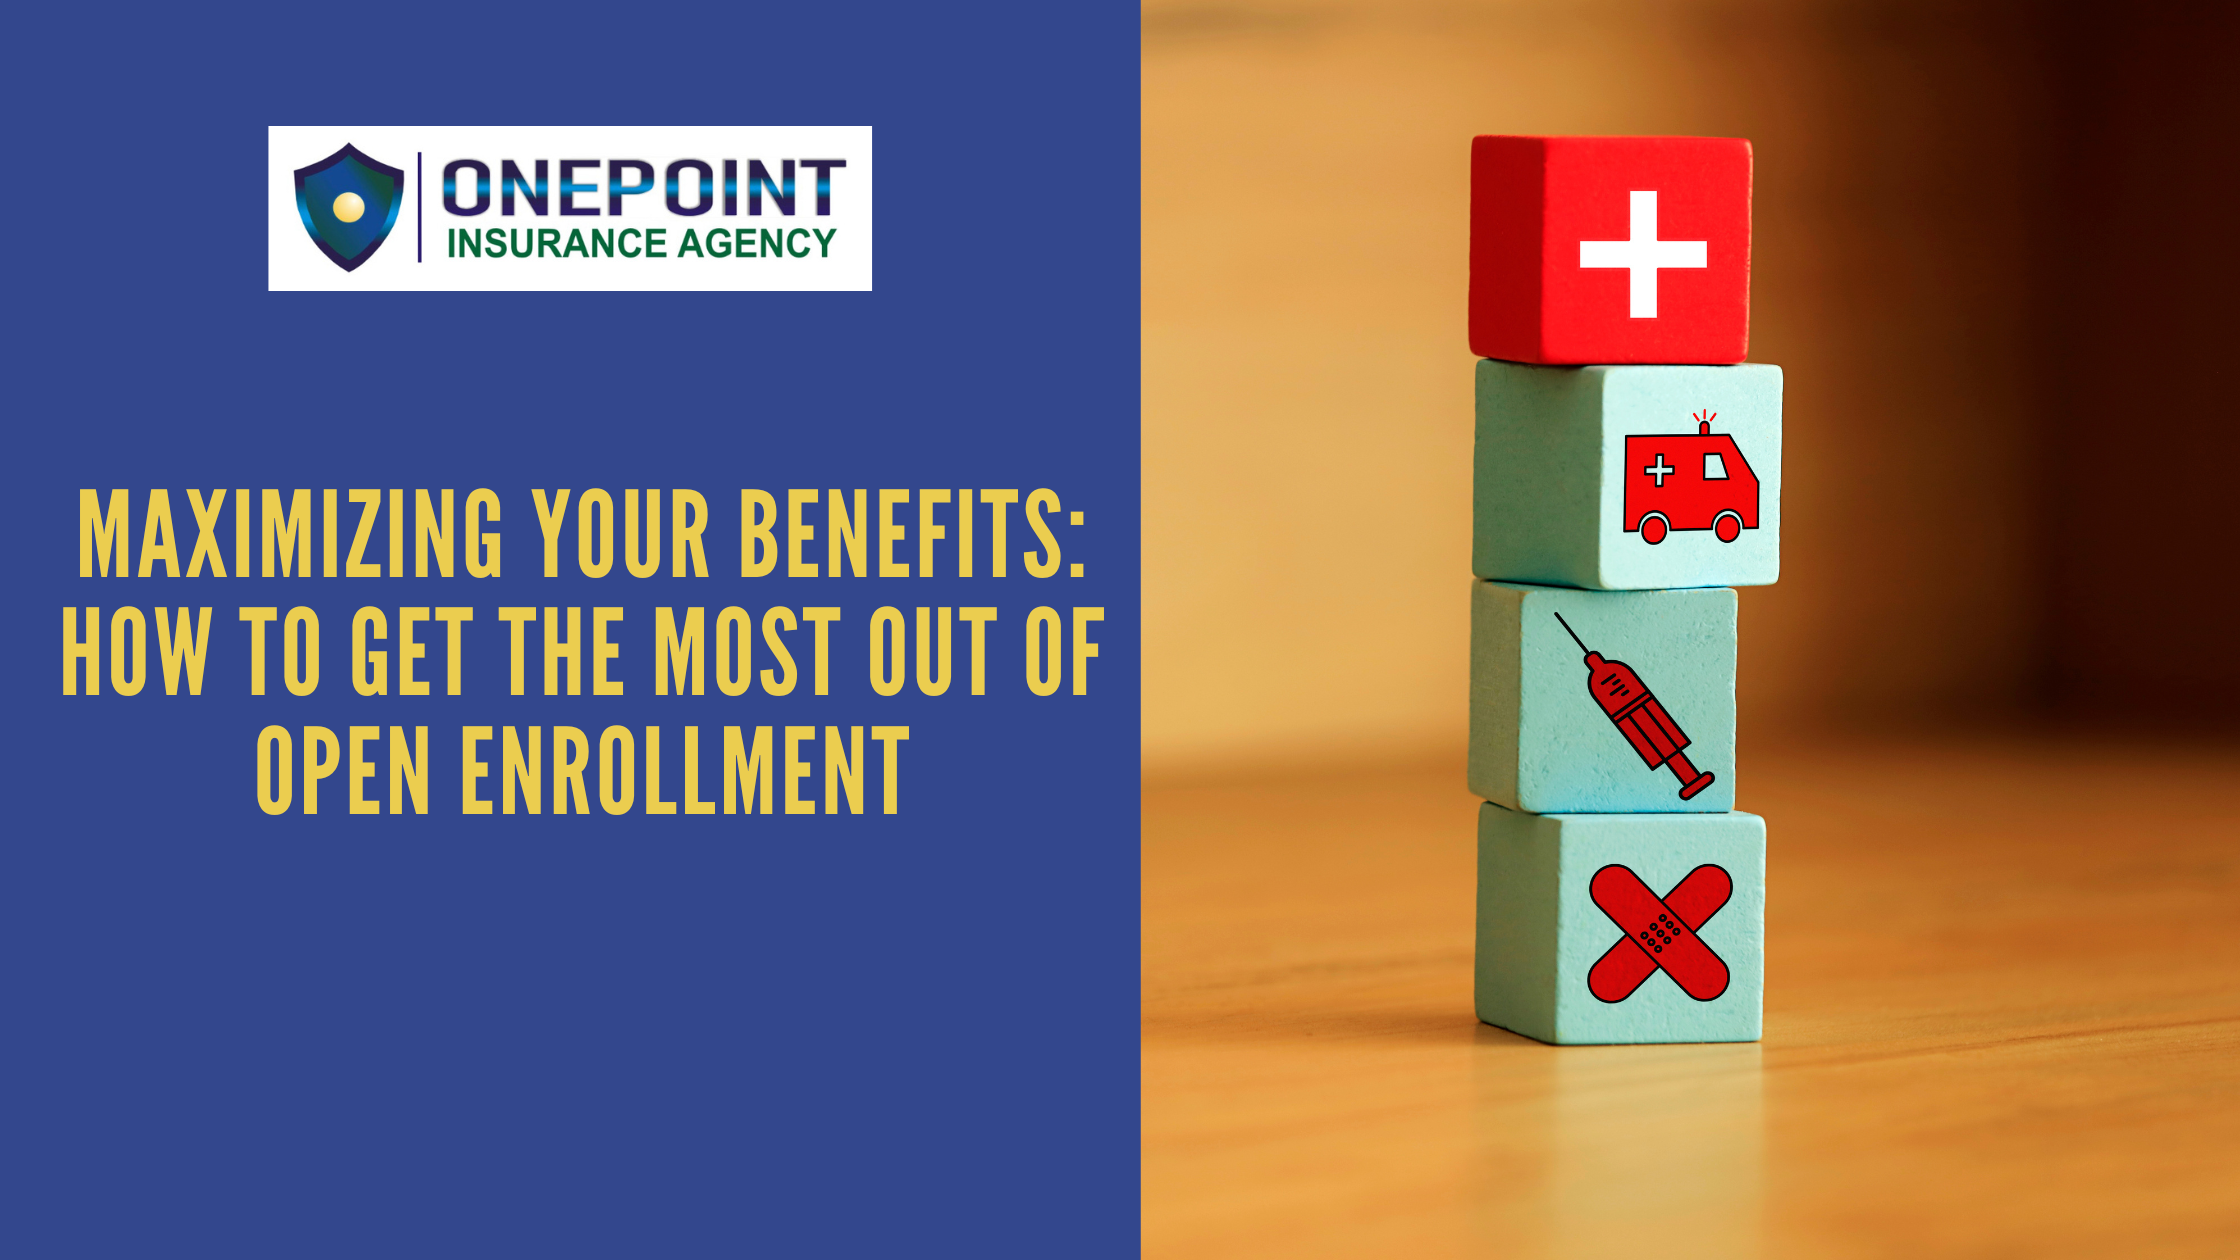 Maximizing Your Benefits: How to Get the Most Out of Open Enrollment